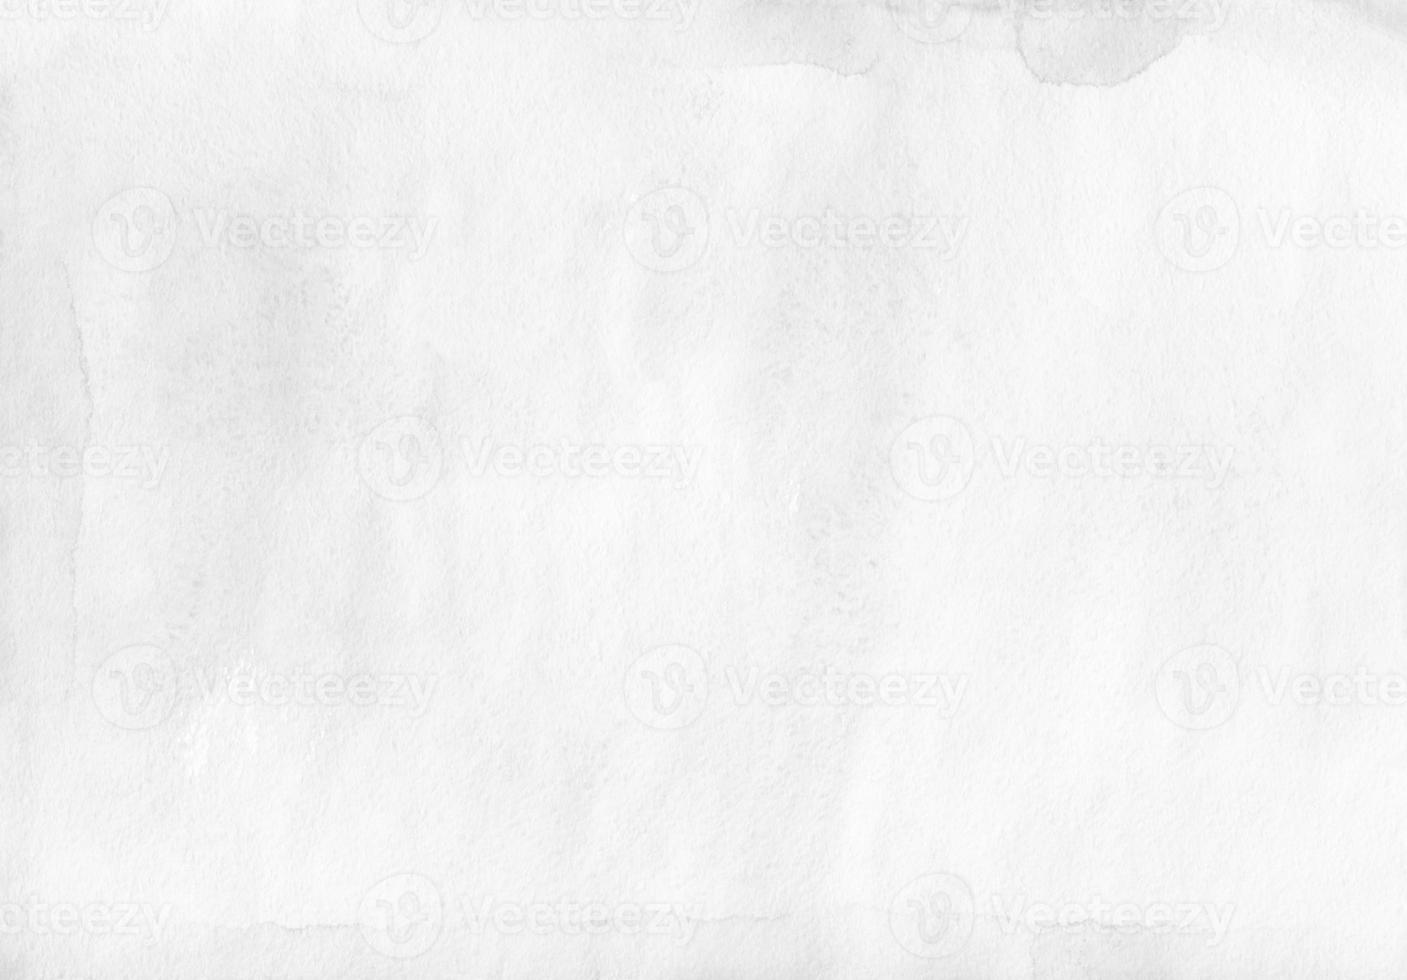 Watercolor light gray background texture. Grey and white stains on paper backdrop Blurred monochrome overlay photo